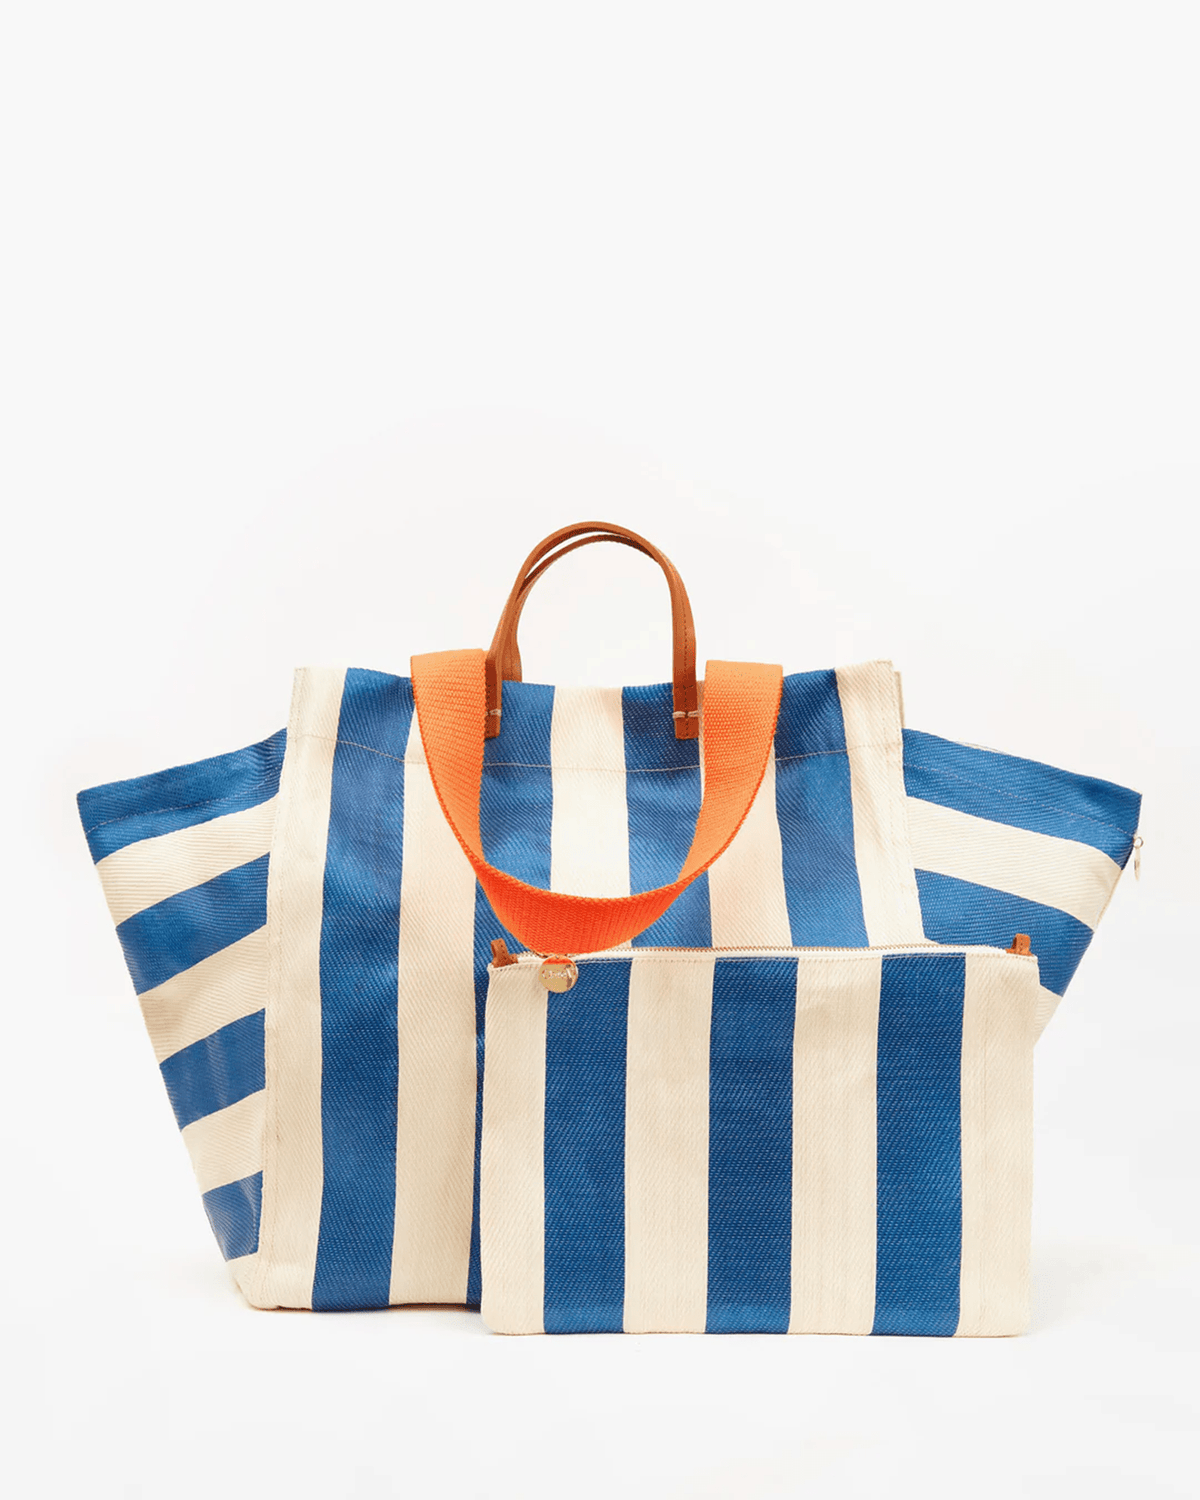 Beach Tote w/ Flat Clutch in Azul & Shell Mesh Clare V. Purchase with  confidence and experience the highest quality!